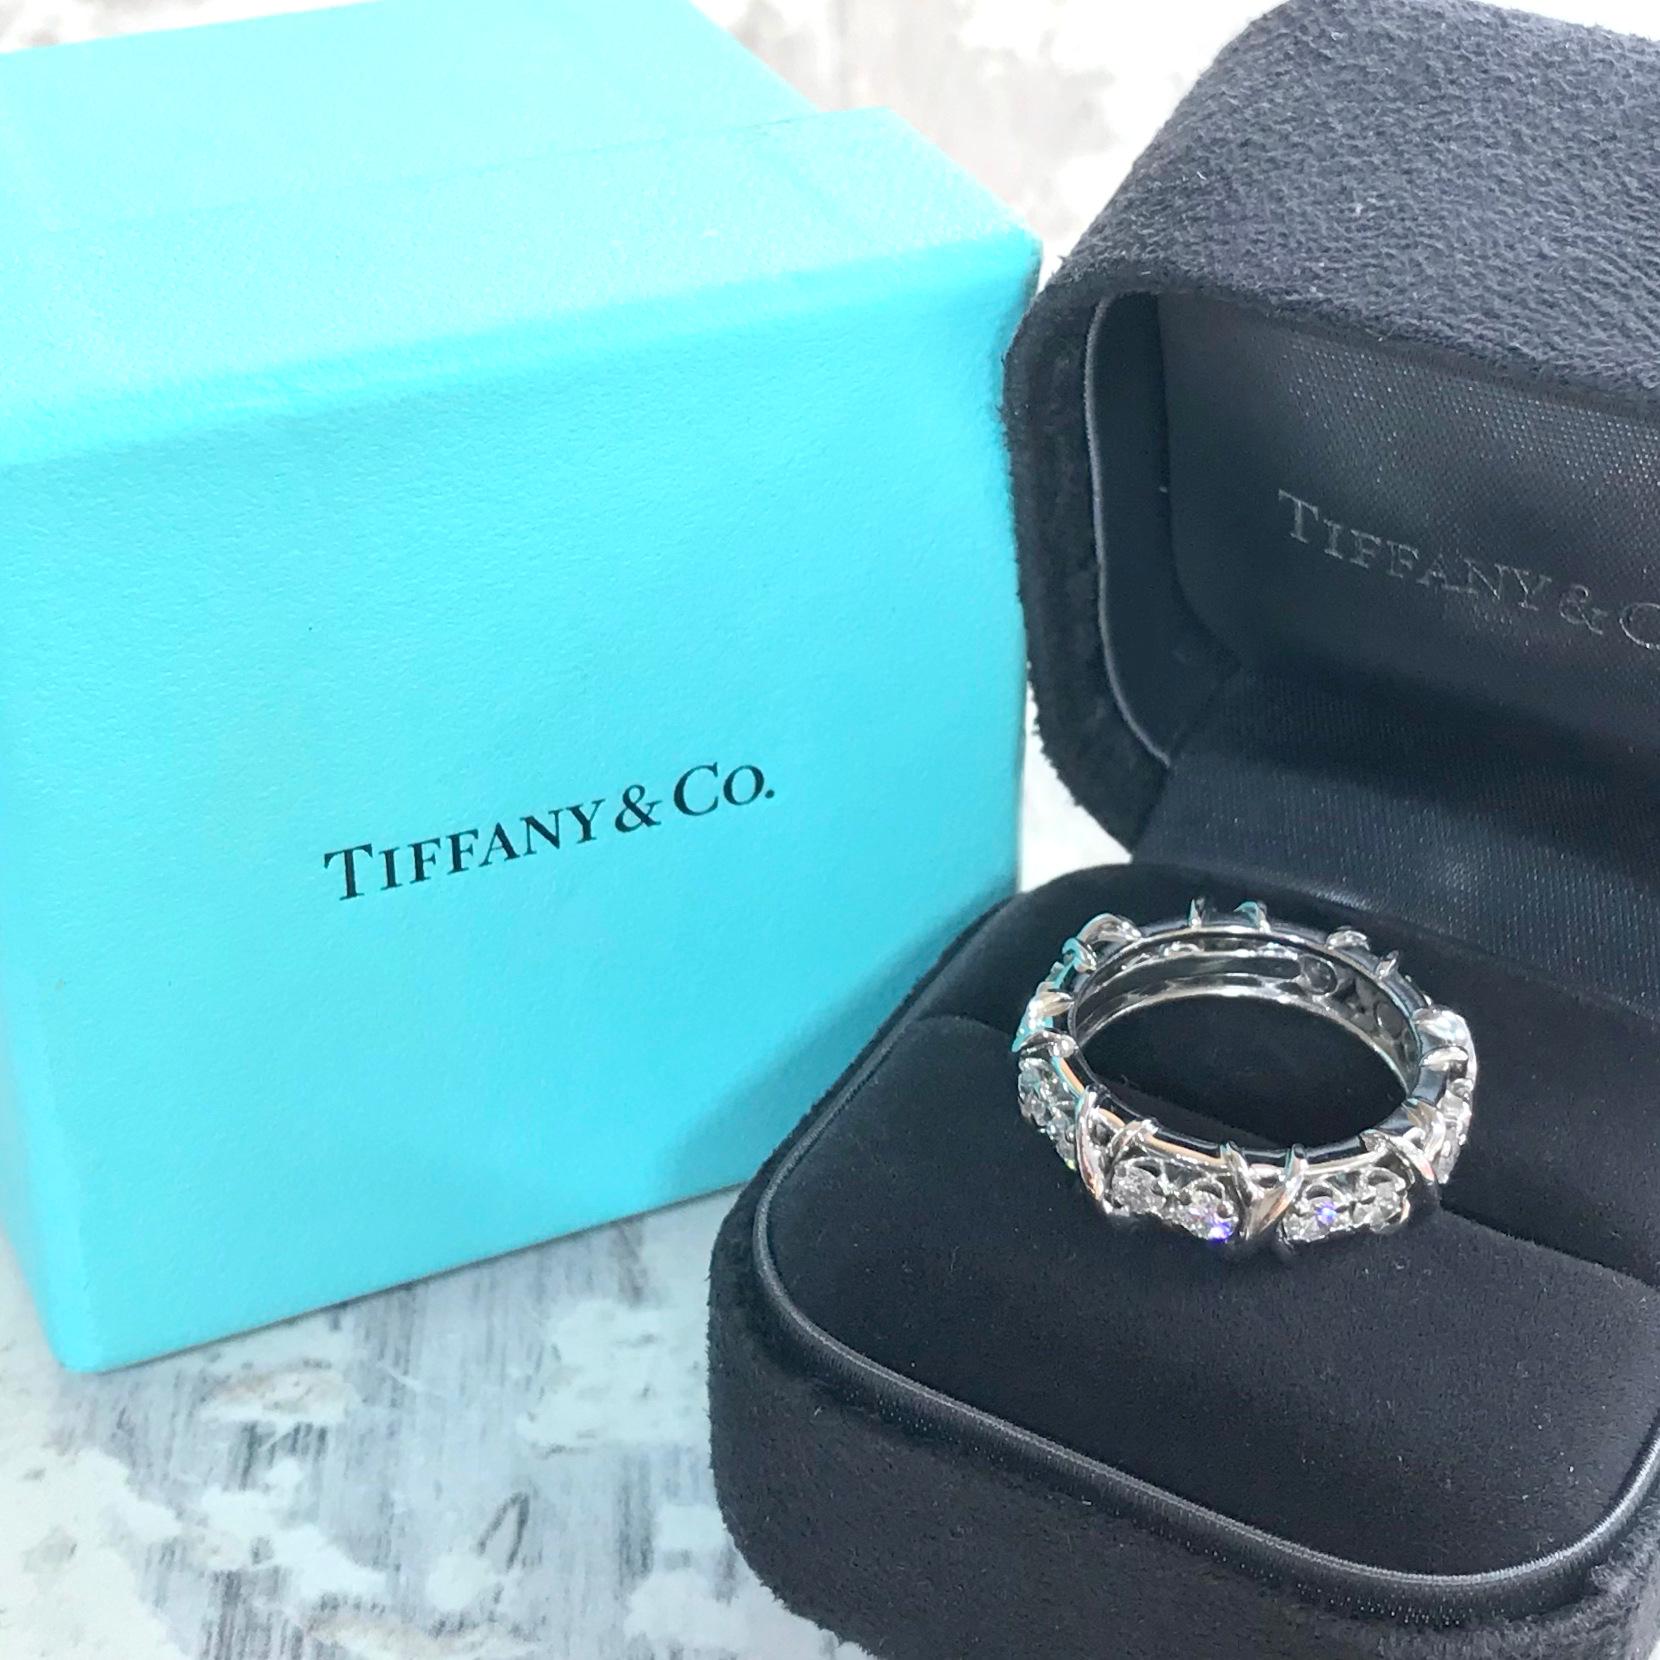 An iconic design from Jean Shlumberger for Tiffany & Co. This dazzling platinum ring features sixteen exceptional diamonds alternating with platinum X’s.

Comes in the original presentation box and outer box.

Cut – Round brilliants.

Colour – E to